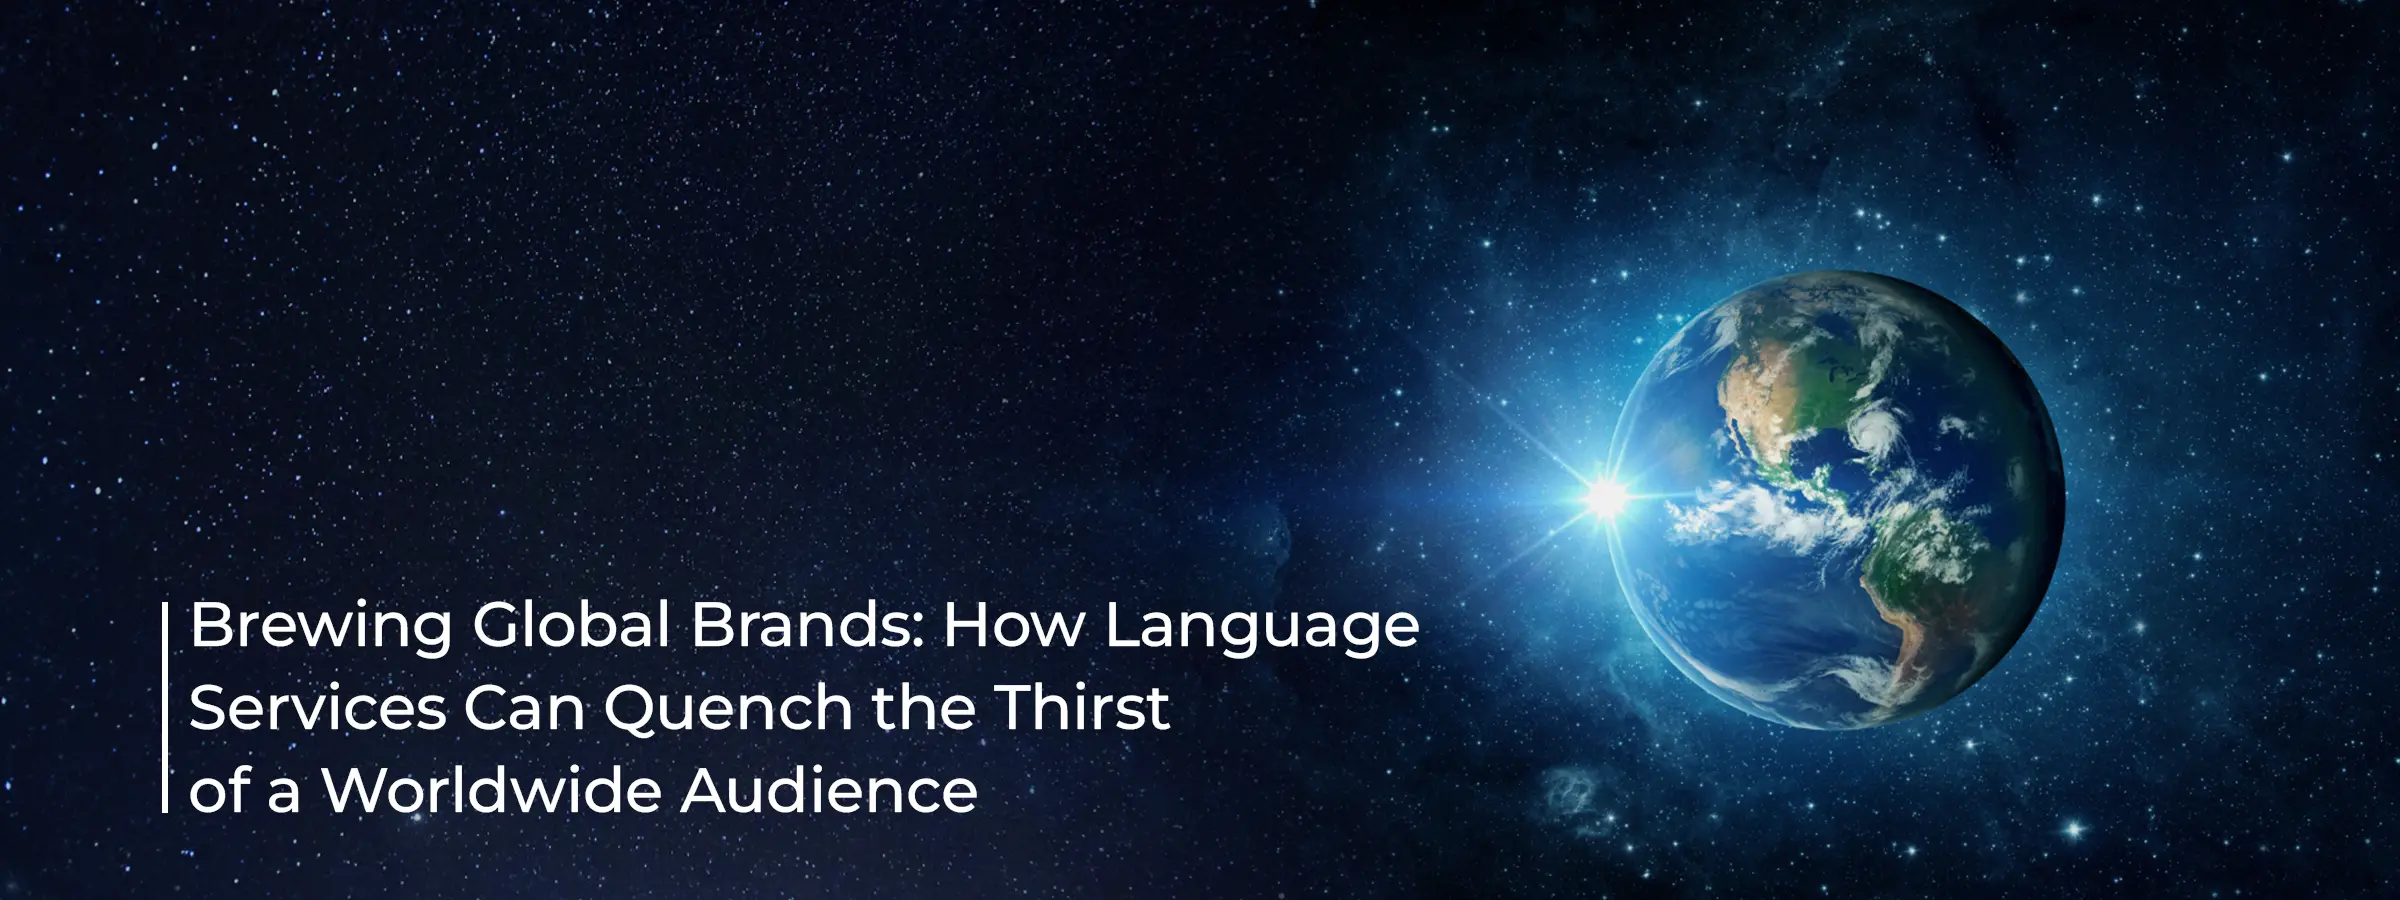 language-services-can-quench-the-thirst-of-a-worldwide-audience